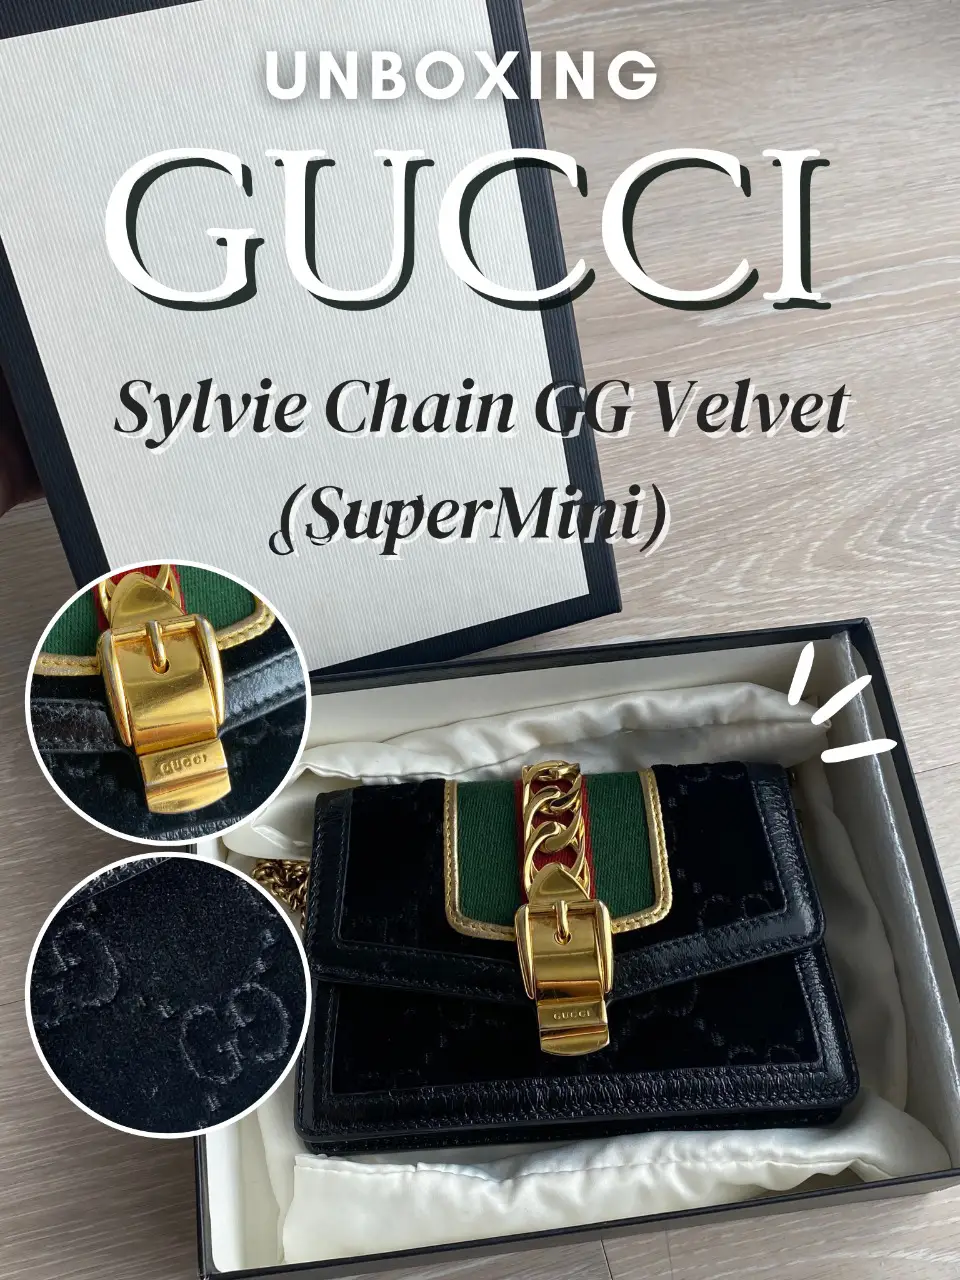 GUCCI MARMONT SUPER MINI BAG UNBOXING AND REVIEW 